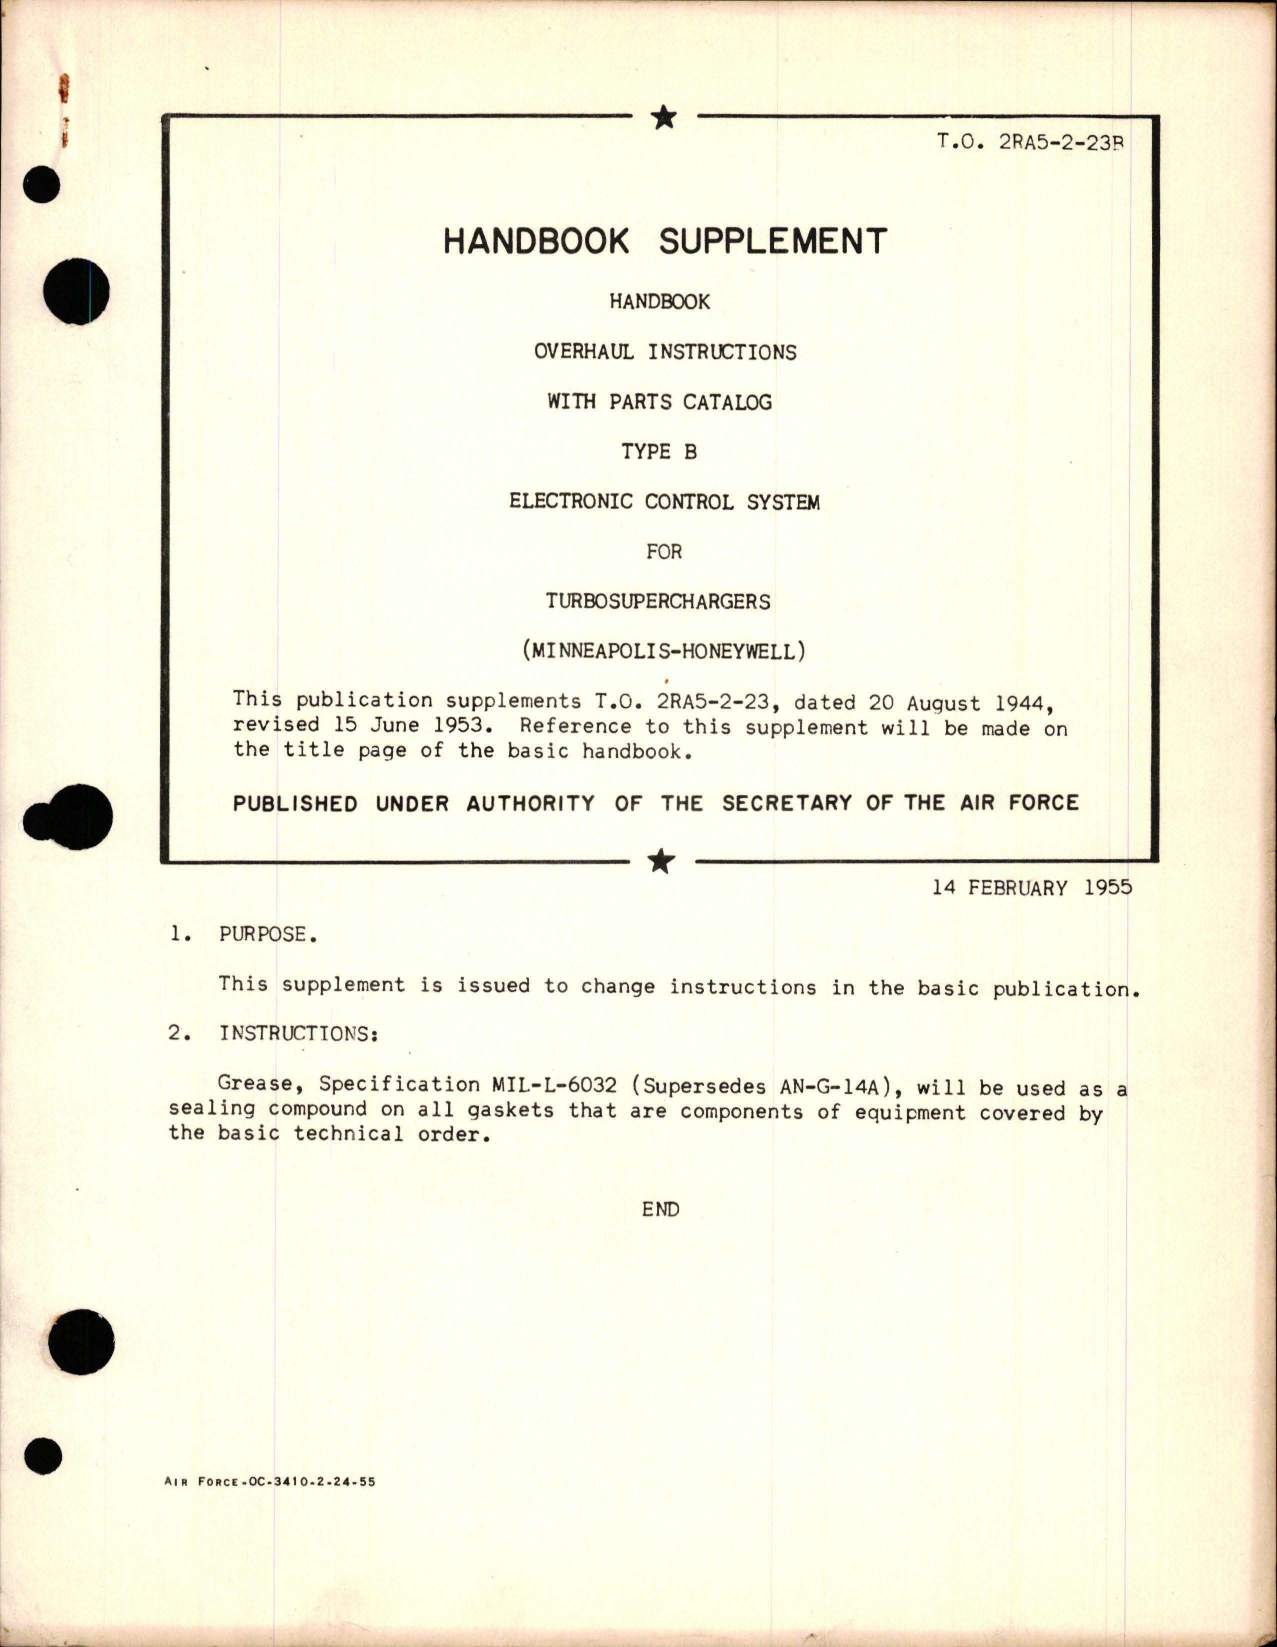 Sample page 1 from AirCorps Library document: Supplement to Overhaul Instructions with Parts Catalog for Electronic Control System for Turbosuperchargers - Type B